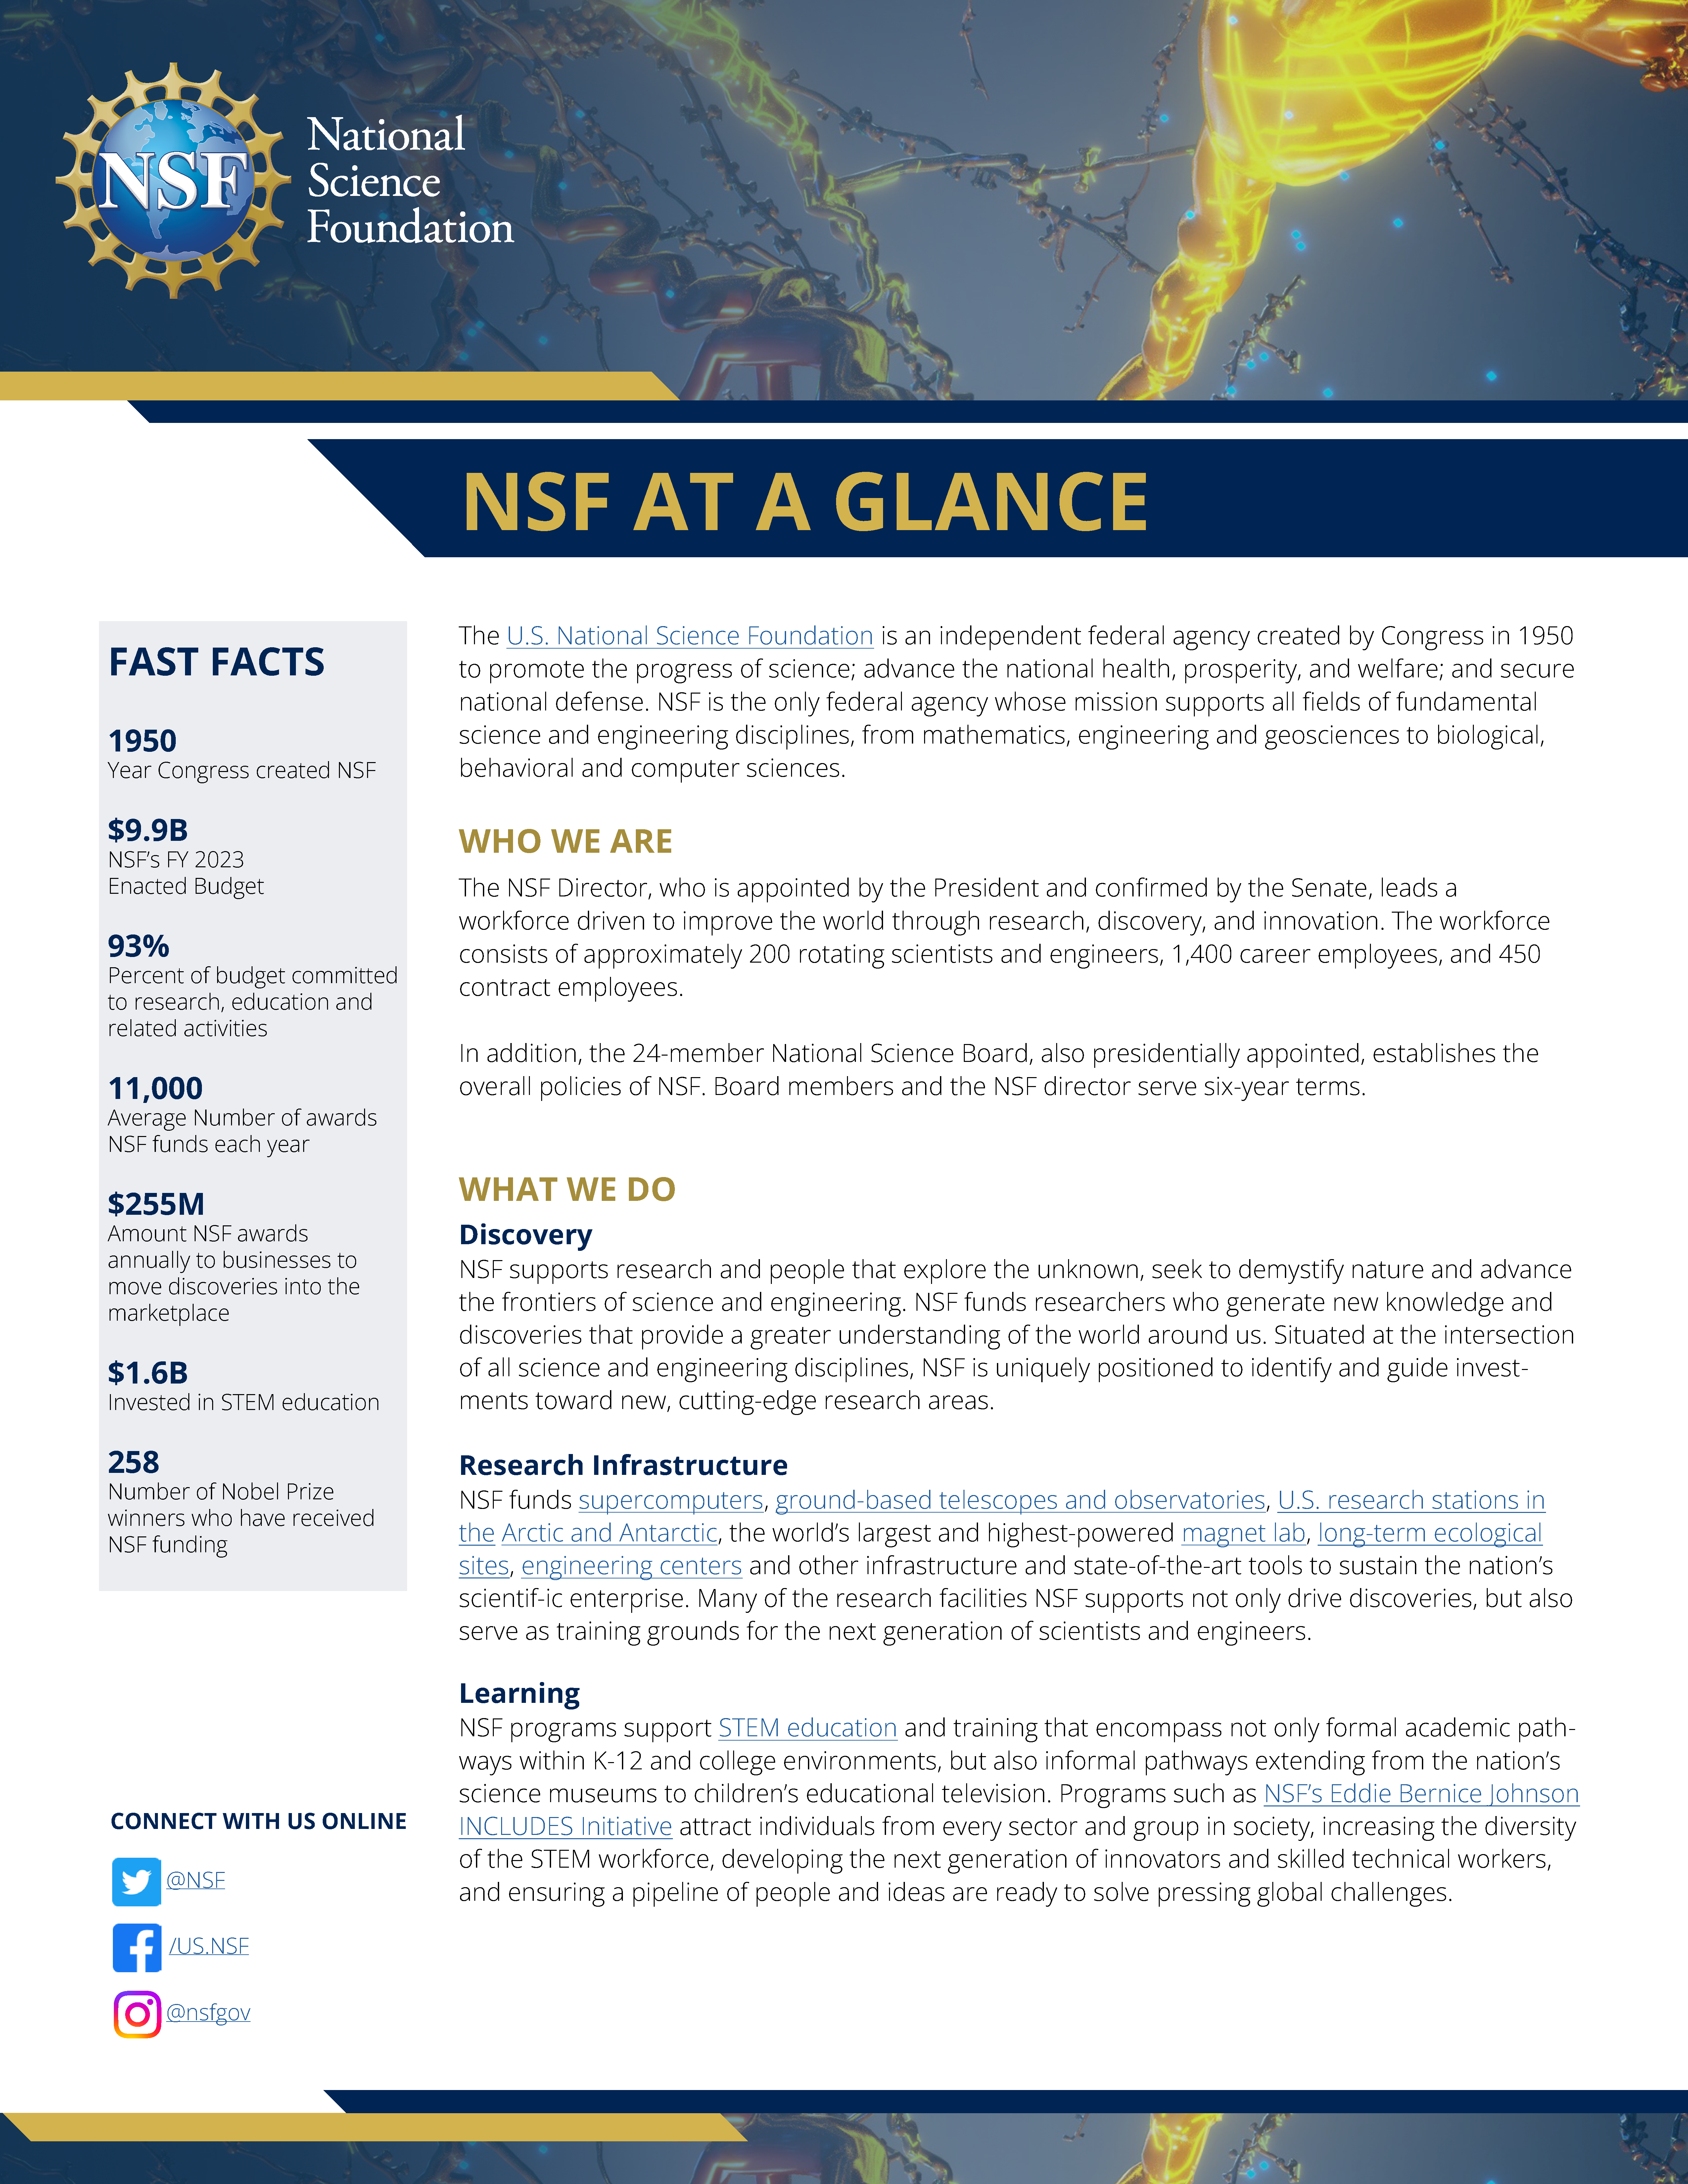 NAF at a Glance cover page